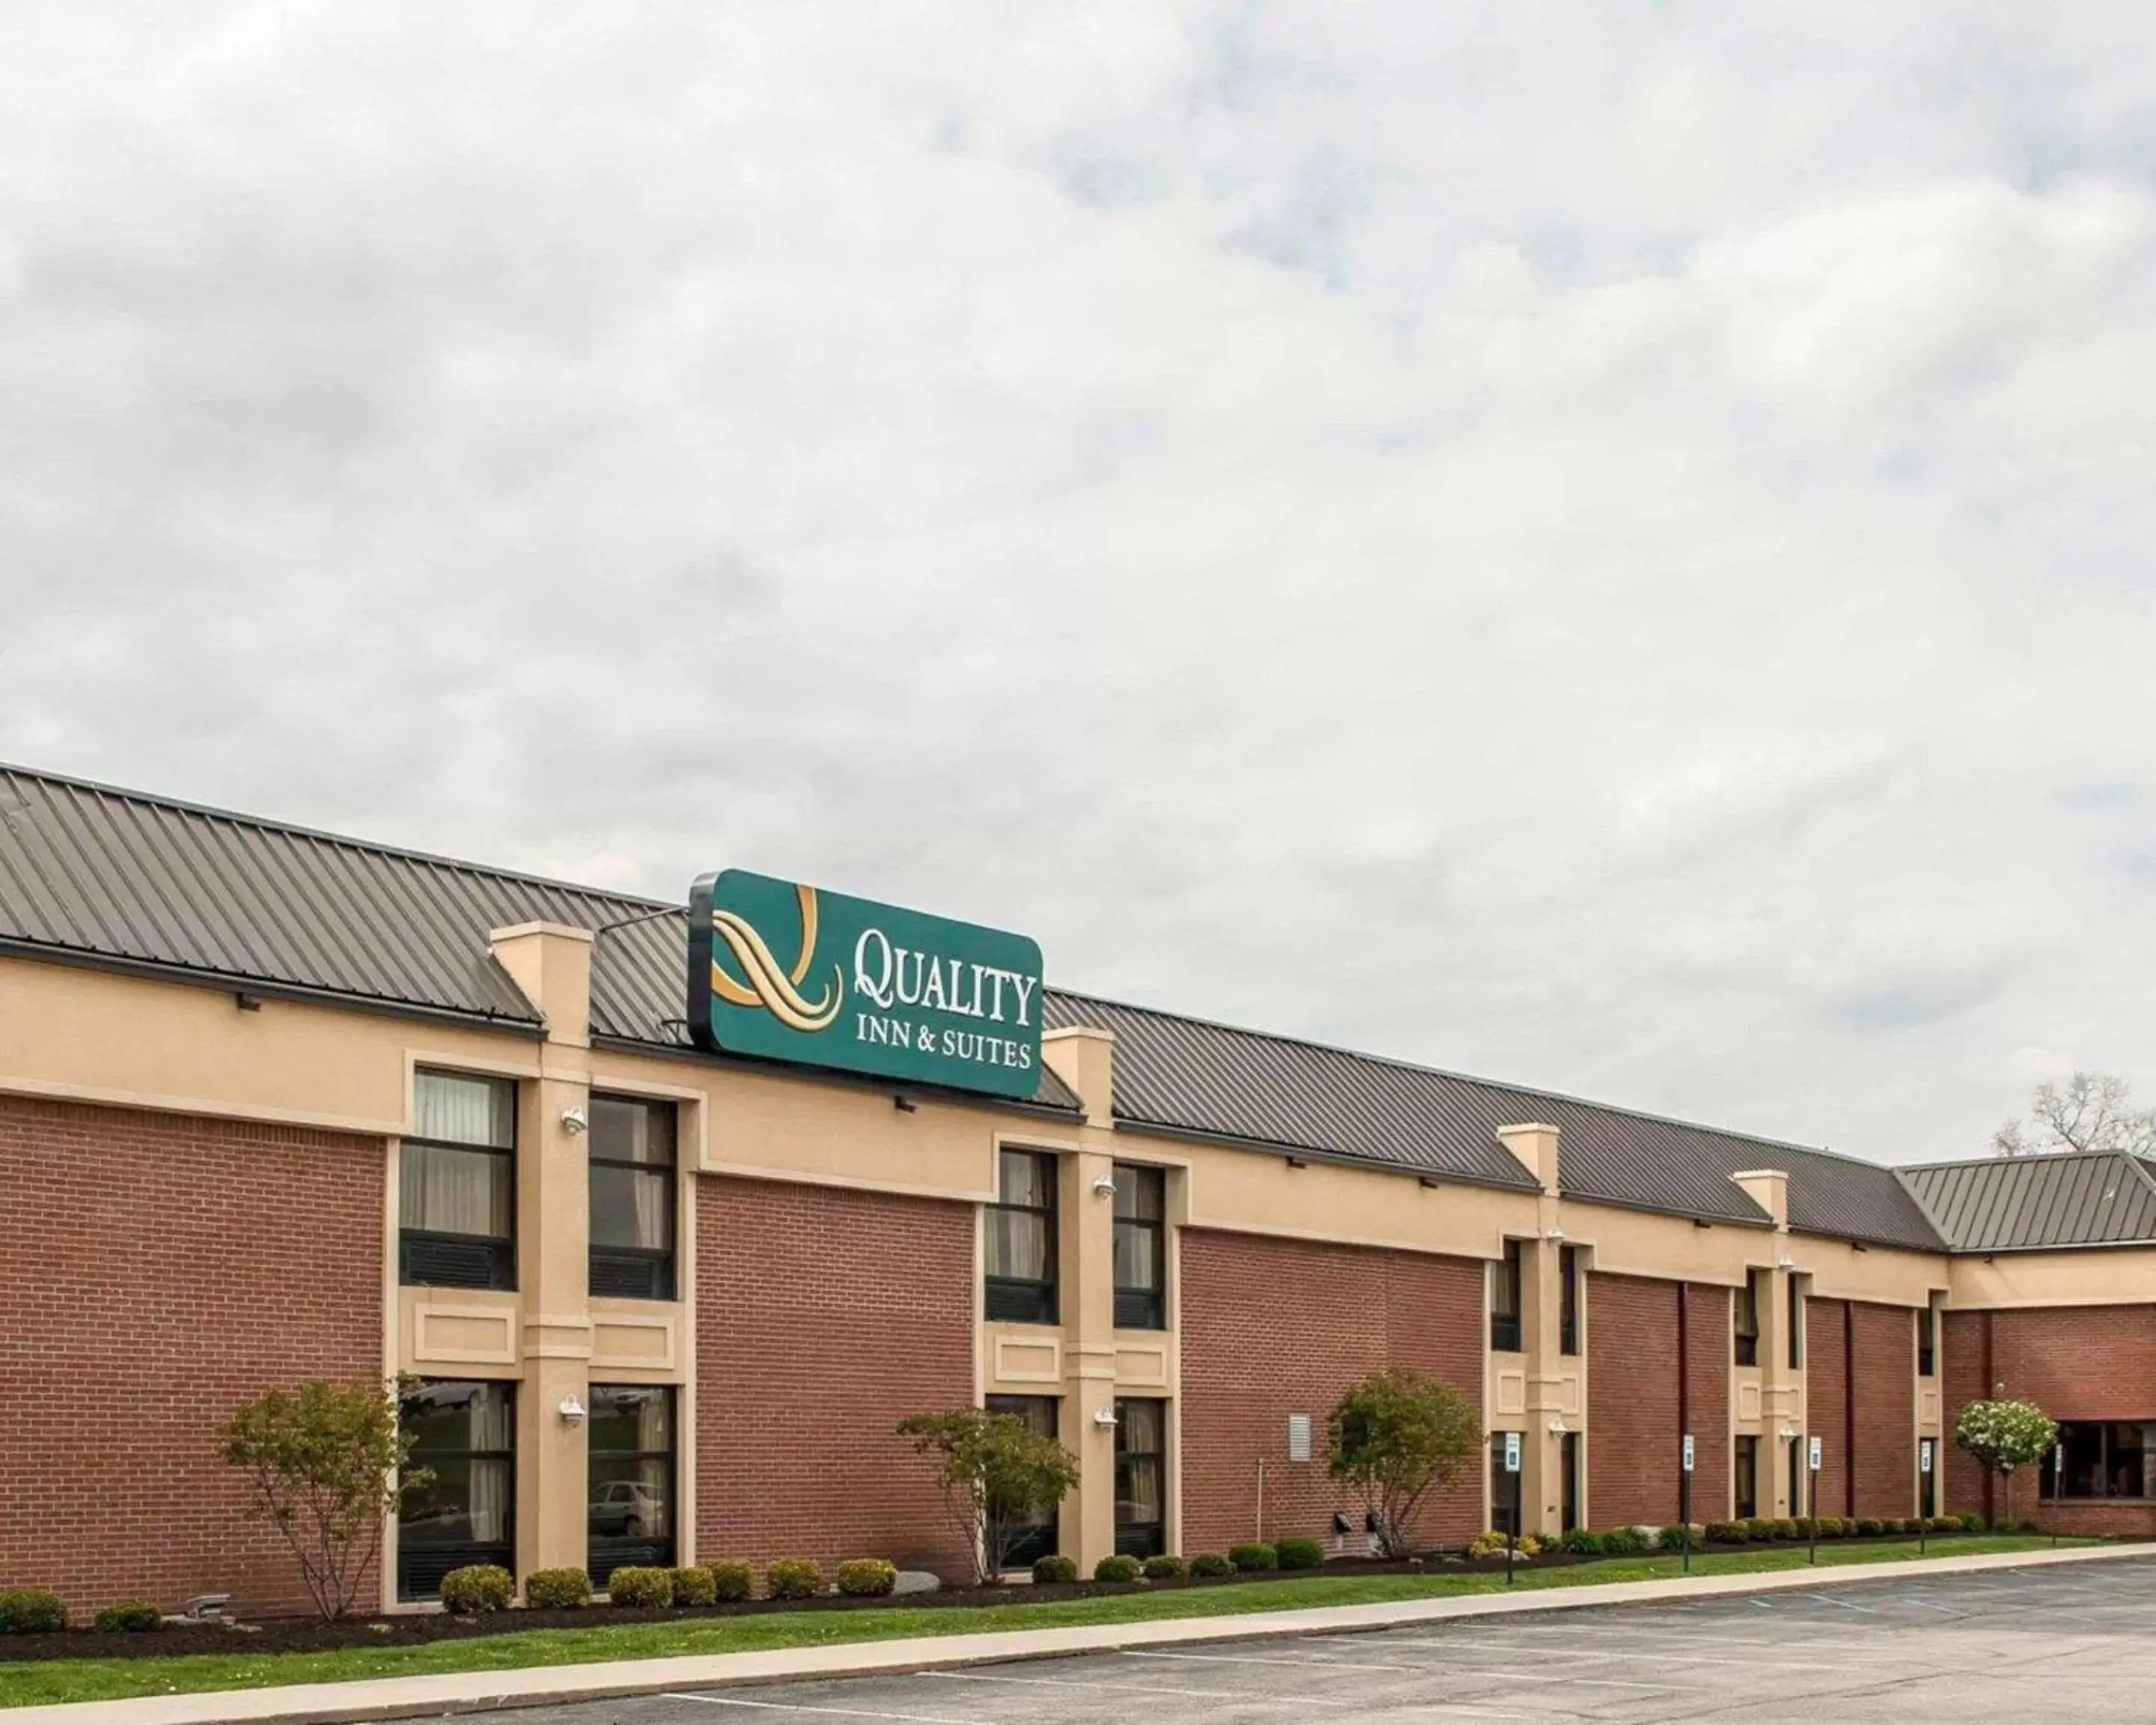 Property Building in Quality Inn & Suites Greenfield I-70